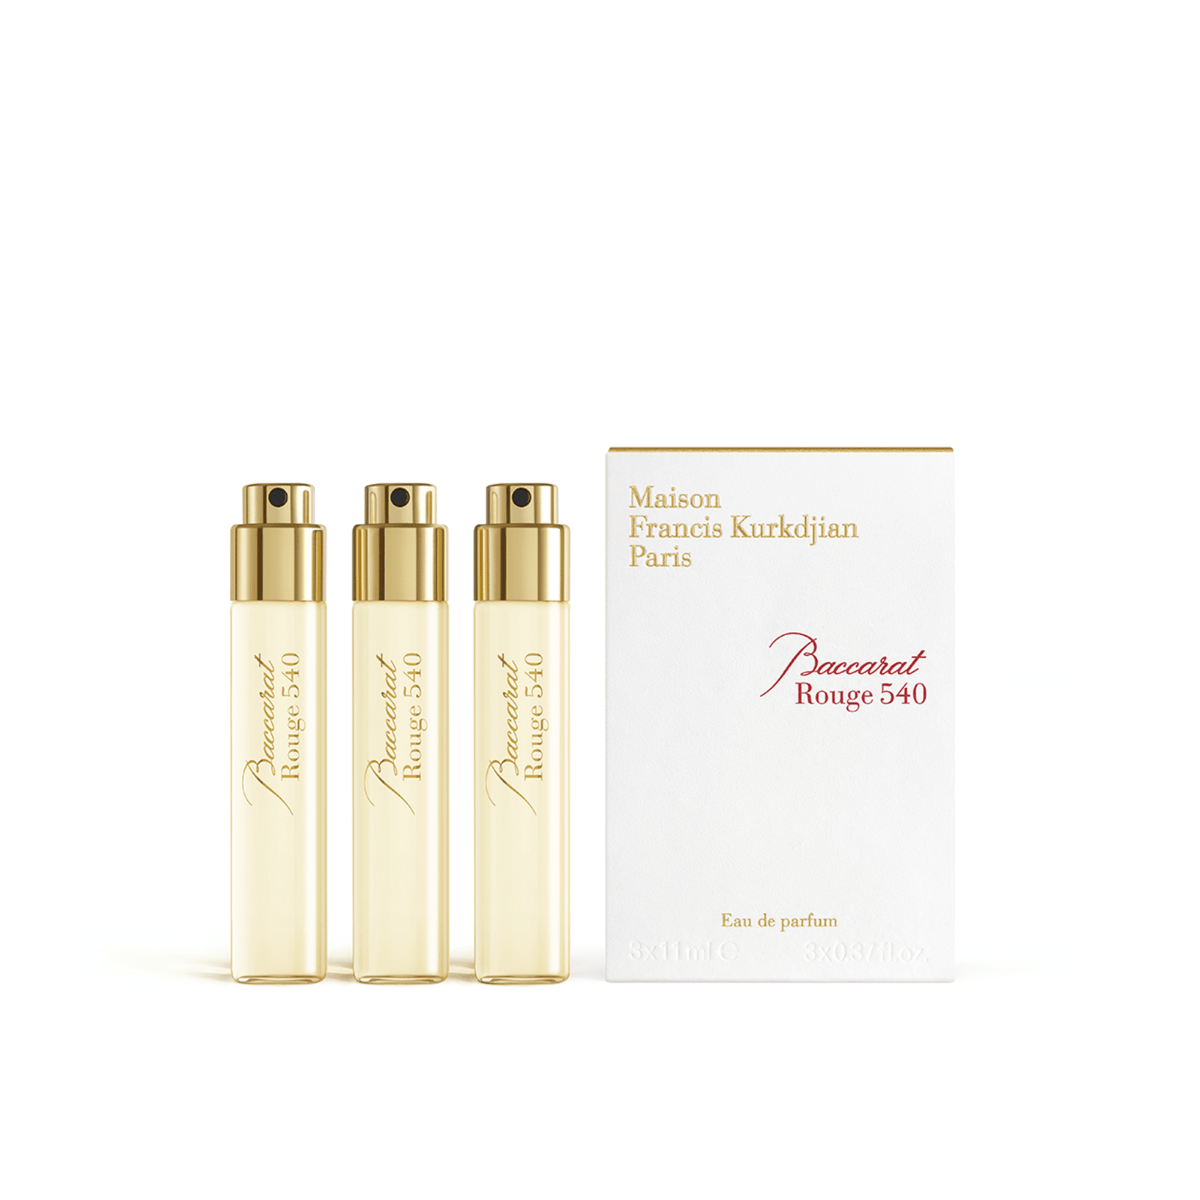 Primary Image of Baccarat Rouge 540 EDP Travel Spray Refills